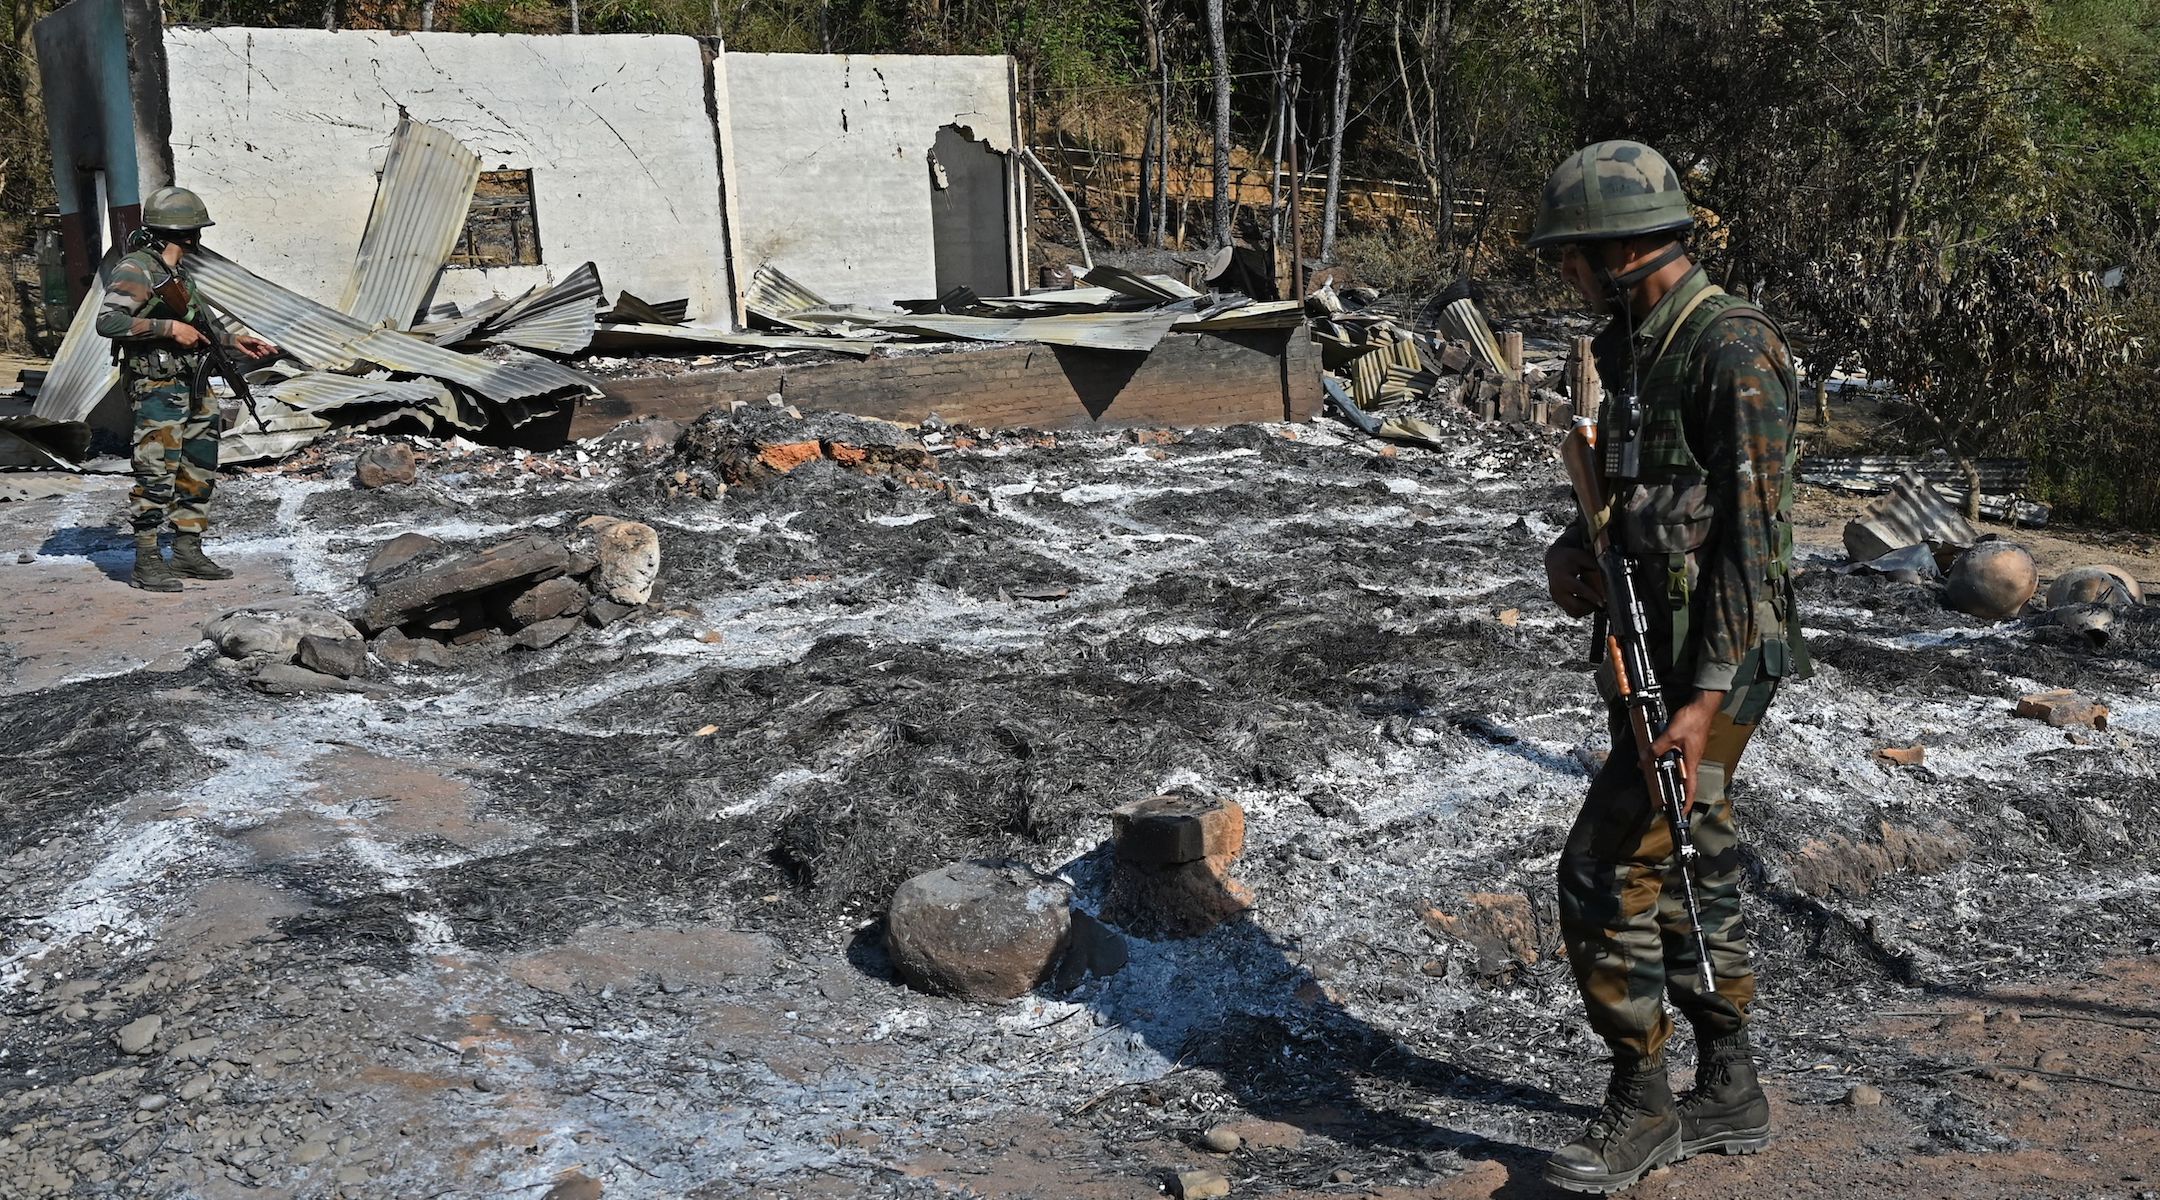 Indian army soldiers inspect the remains of a house that was set on fire by a mob in an area of a village in the Senapati district of India’s Manipur state, May 8, 2023. (Arun Sankar/AFP via Getty Images)